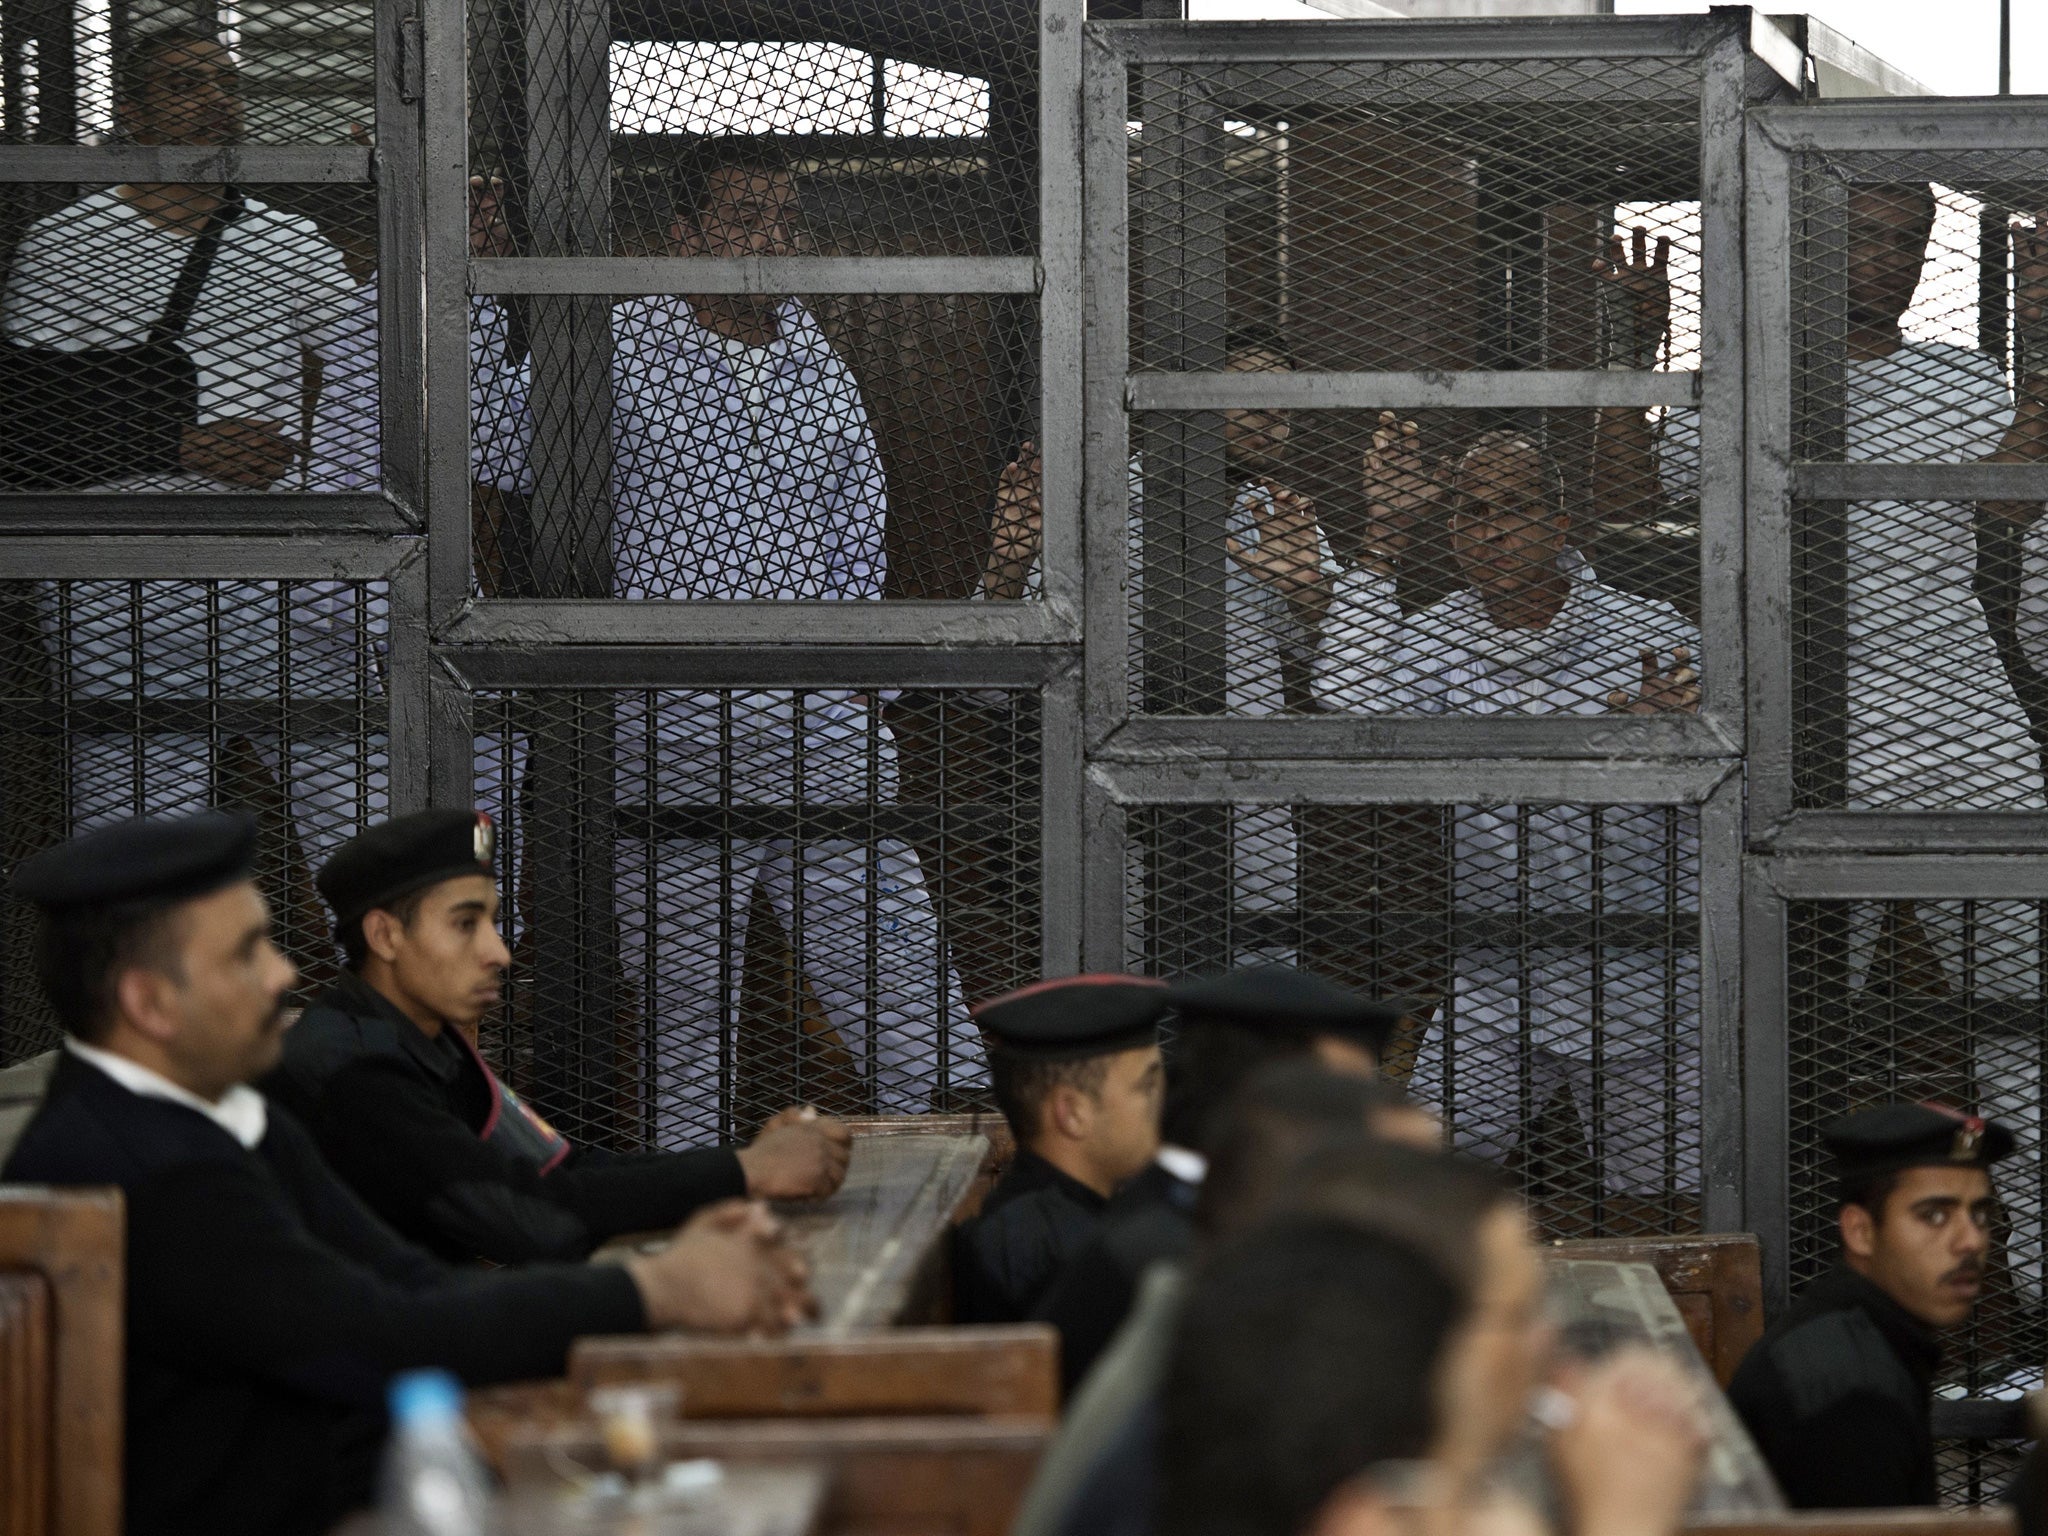 Al-Jazeera journalist Peter Greste and his colleagues stand in the defendants' cage at their trial in Cairo for allegedly support the Muslim Brotherhood